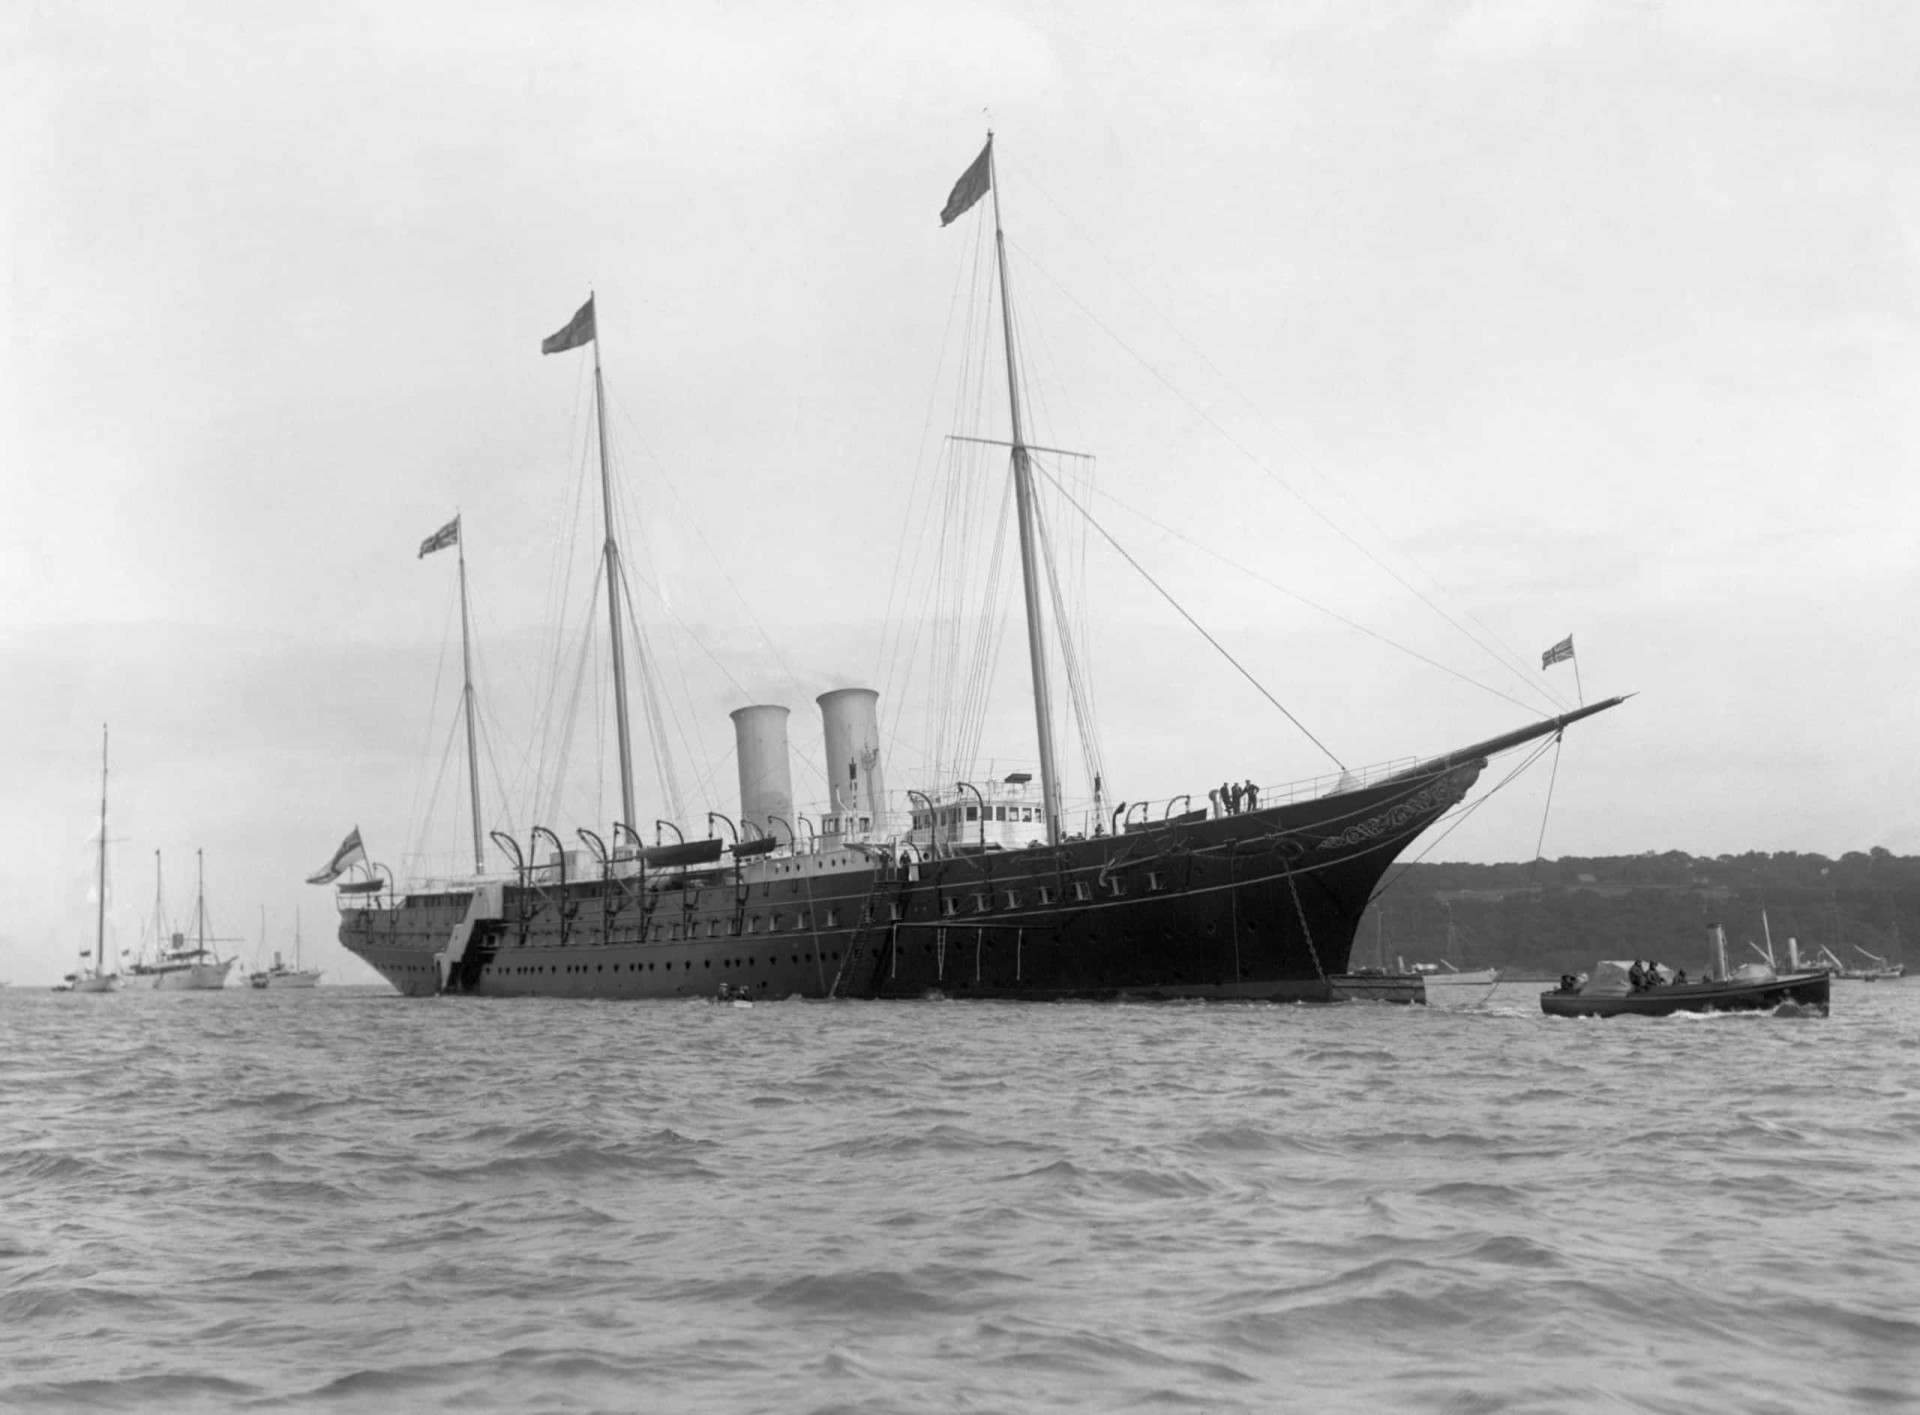 <p><em>Britannia</em>'s predecessor, HMY <em>Victoria and Albert III</em>, is pictured at anchor in the Solent off Portsmouth harbor. Built for Queen <a href="https://www.starsinsider.com/lifestyle/226263/incredible-photos-from-the-victorian-era" rel="noopener">Victoria</a>, this was the first royal yacht not to be powered by sail. She was decommissioned in 1939.</p><p><a href="https://www.msn.com/en-sg/community/channel/vid-7xx8mnucu55yw63we9va2gwr7uihbxwc68fxqp25x6tg4ftibpra?cvid=94631541bc0f4f89bfd59158d696ad7e">Follow us and access great exclusive content every day</a></p>